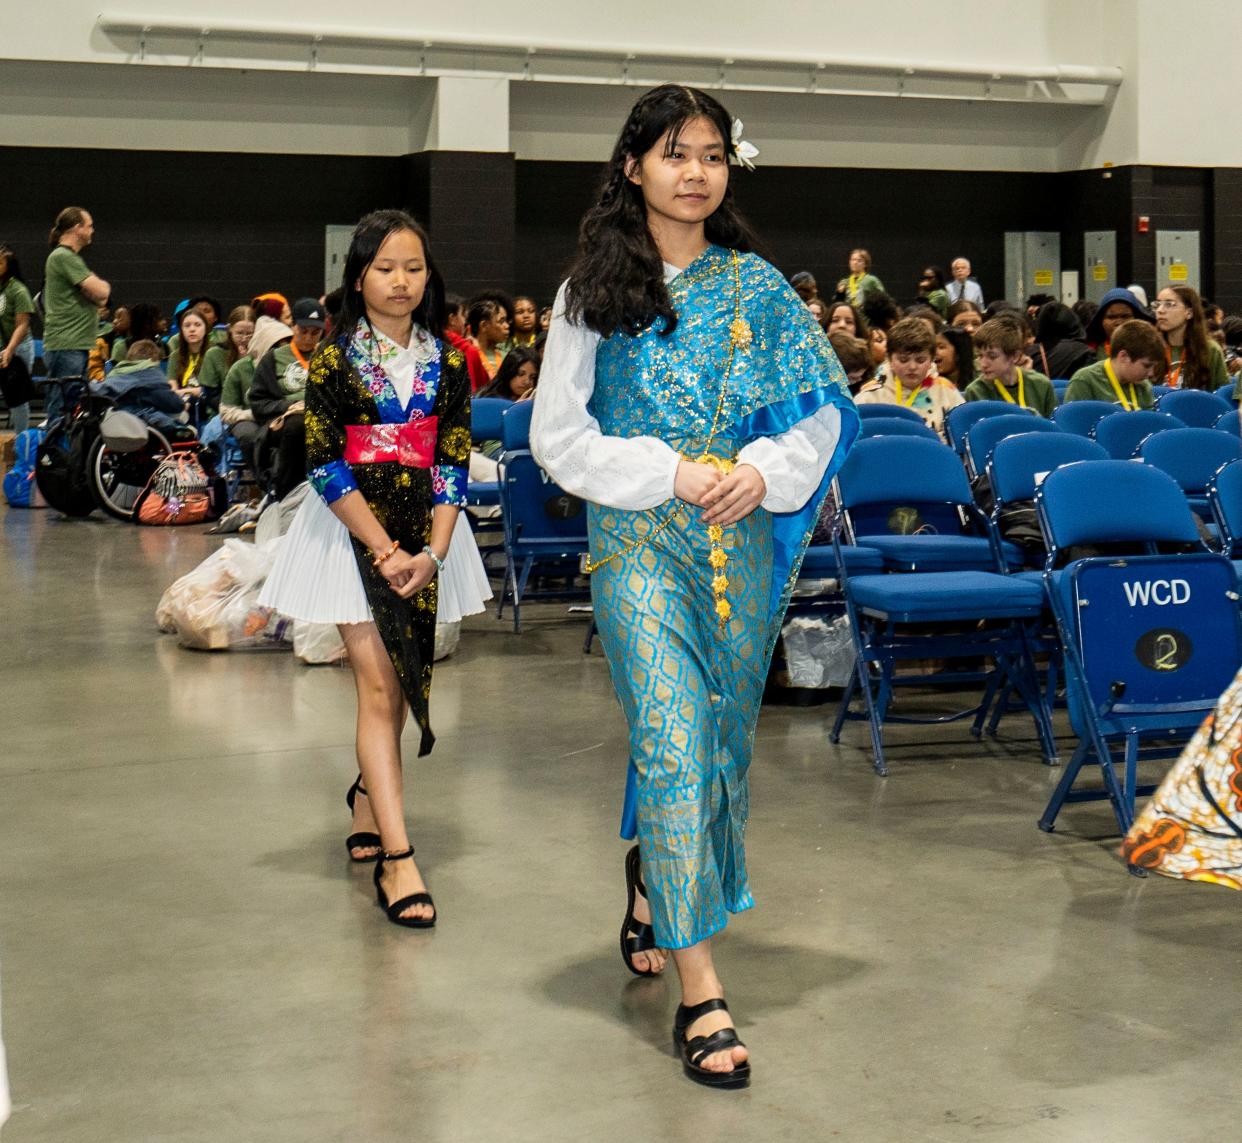 Milwaukee Academy of Chinese Language fifth-graders Kayia Vang, left, and Marra Chrara, right, walk in a cultural fashion show at the Milwaukee Public School World Fair.